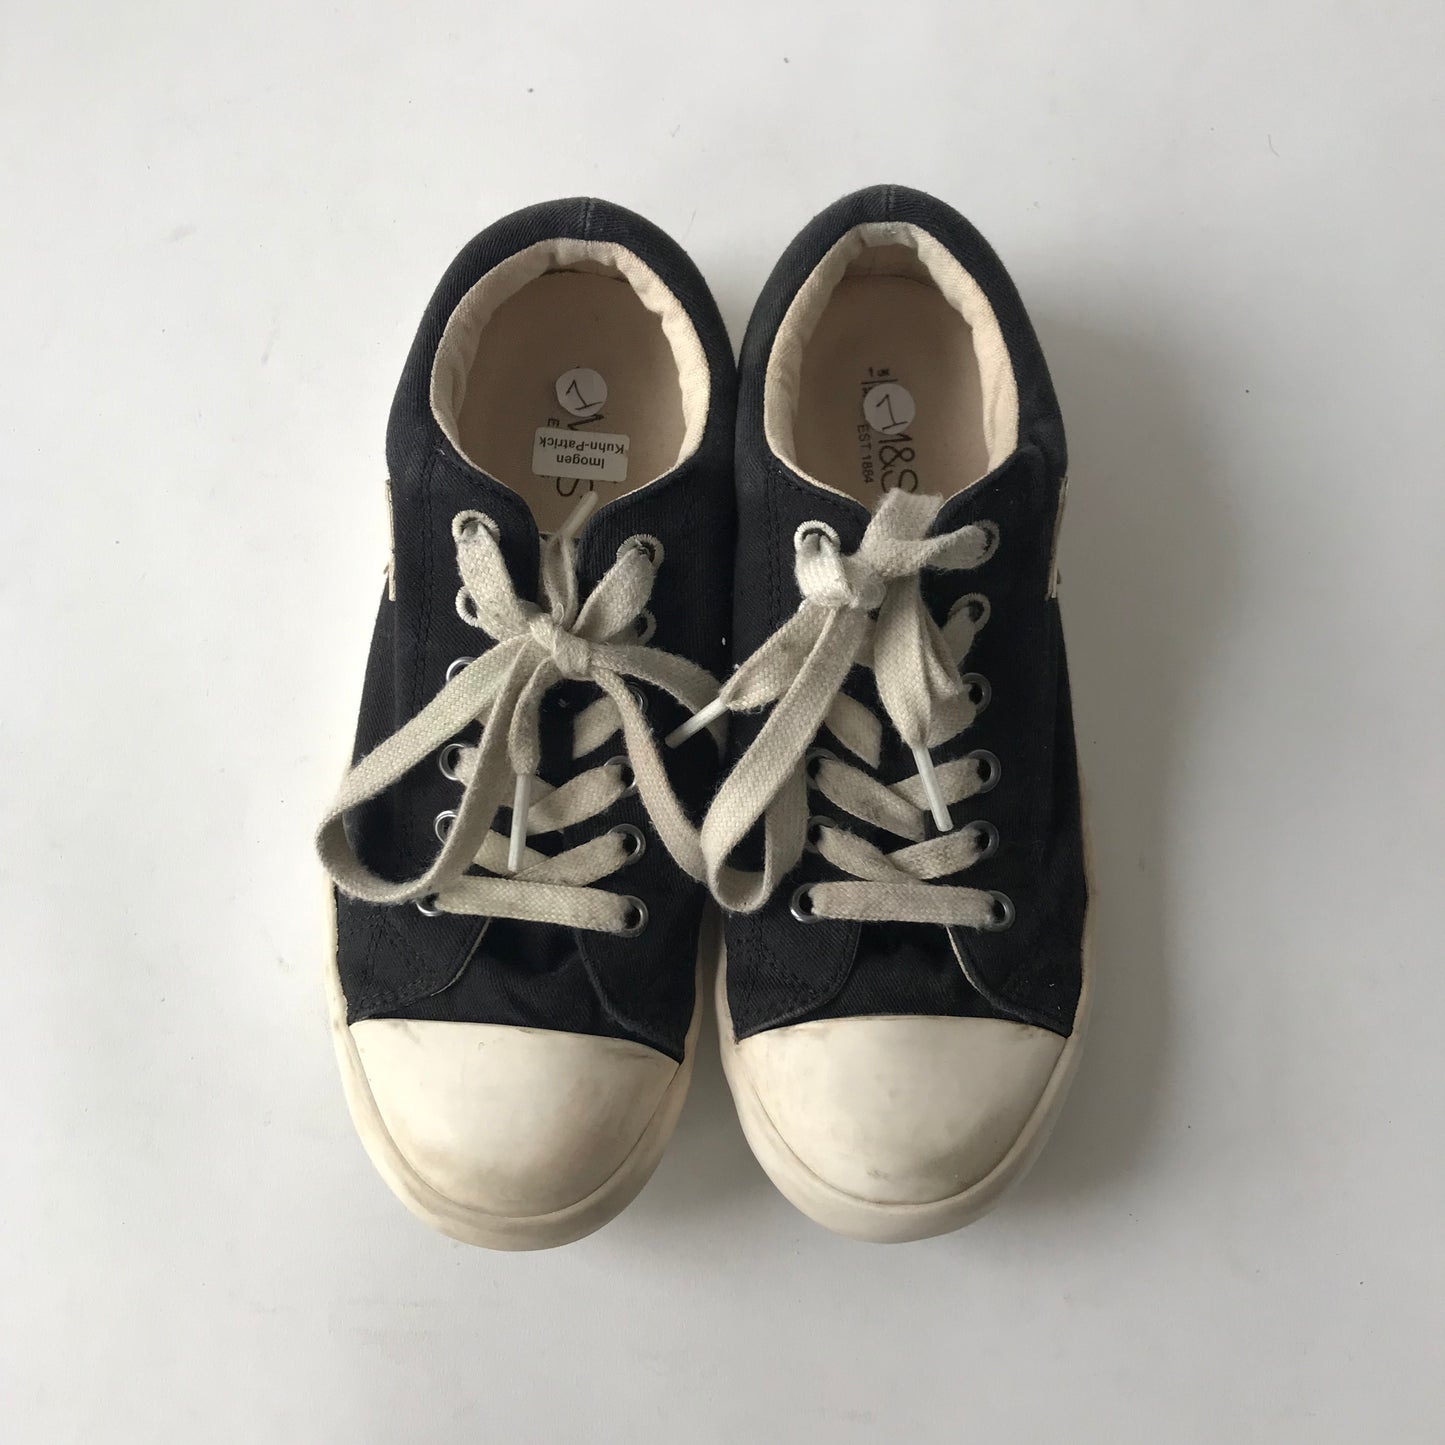 M&S Trainers with Lightning Shoe Size 1